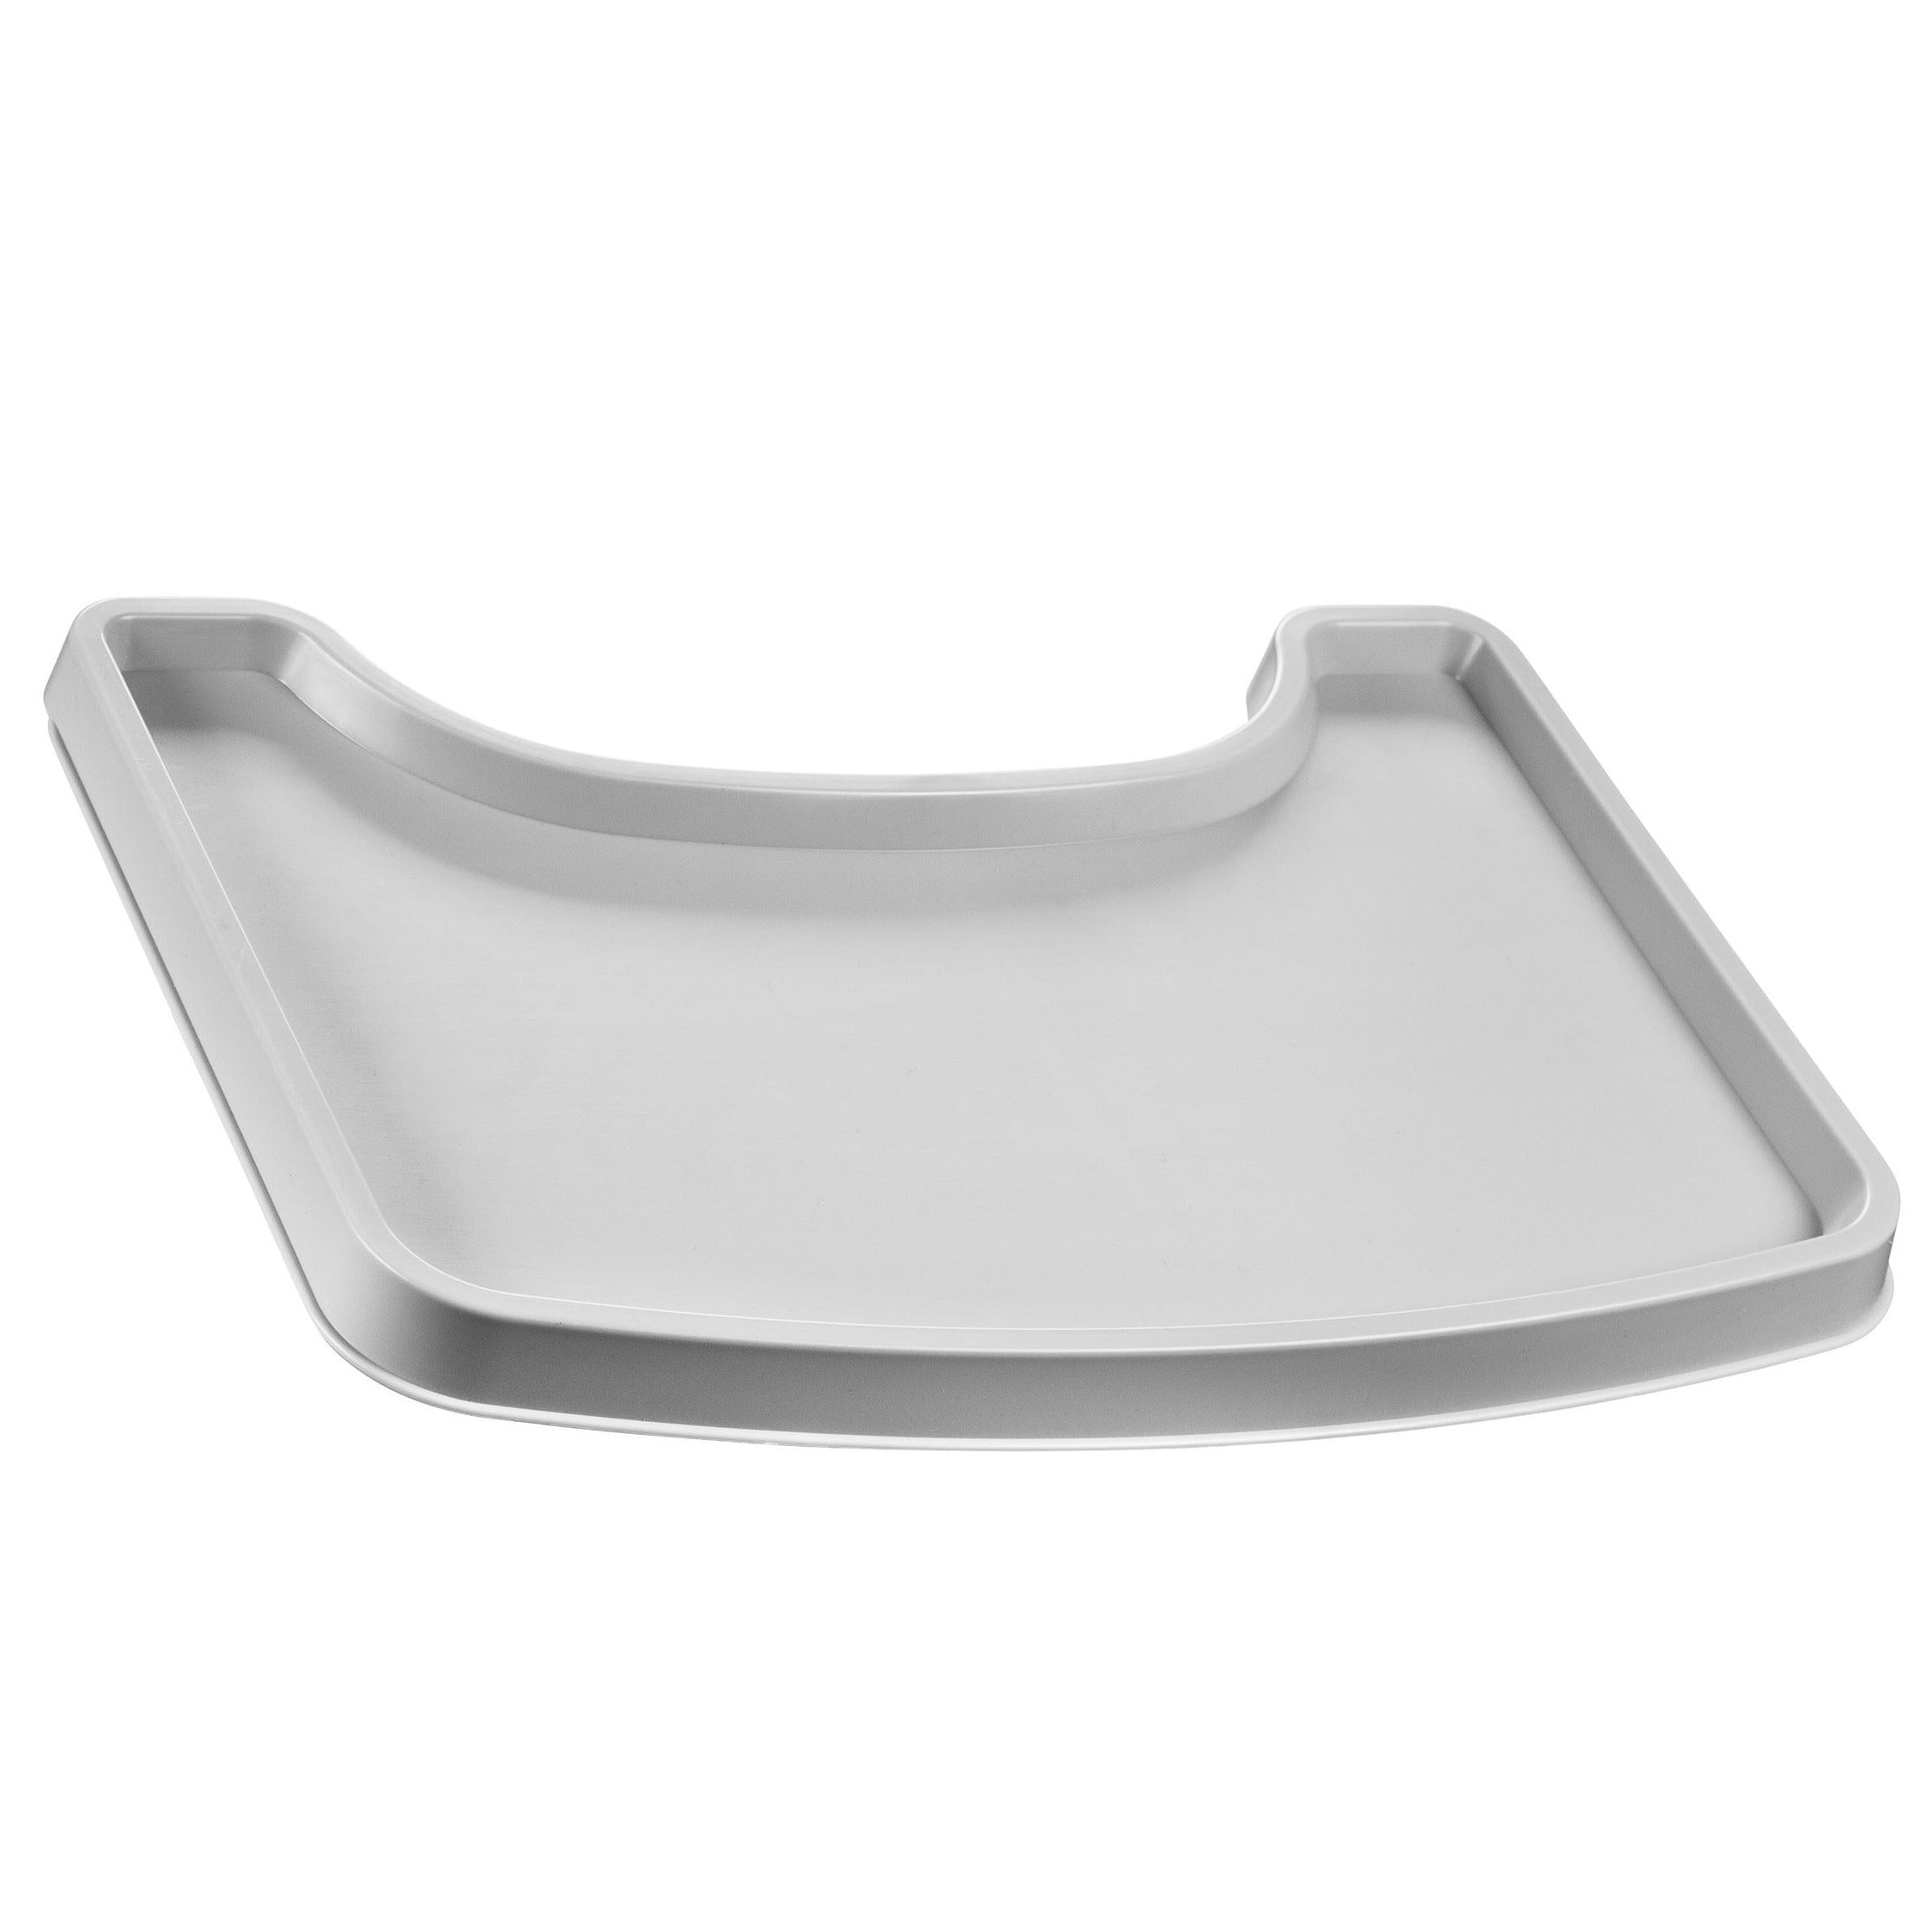 Baby Throne High Chair Tray